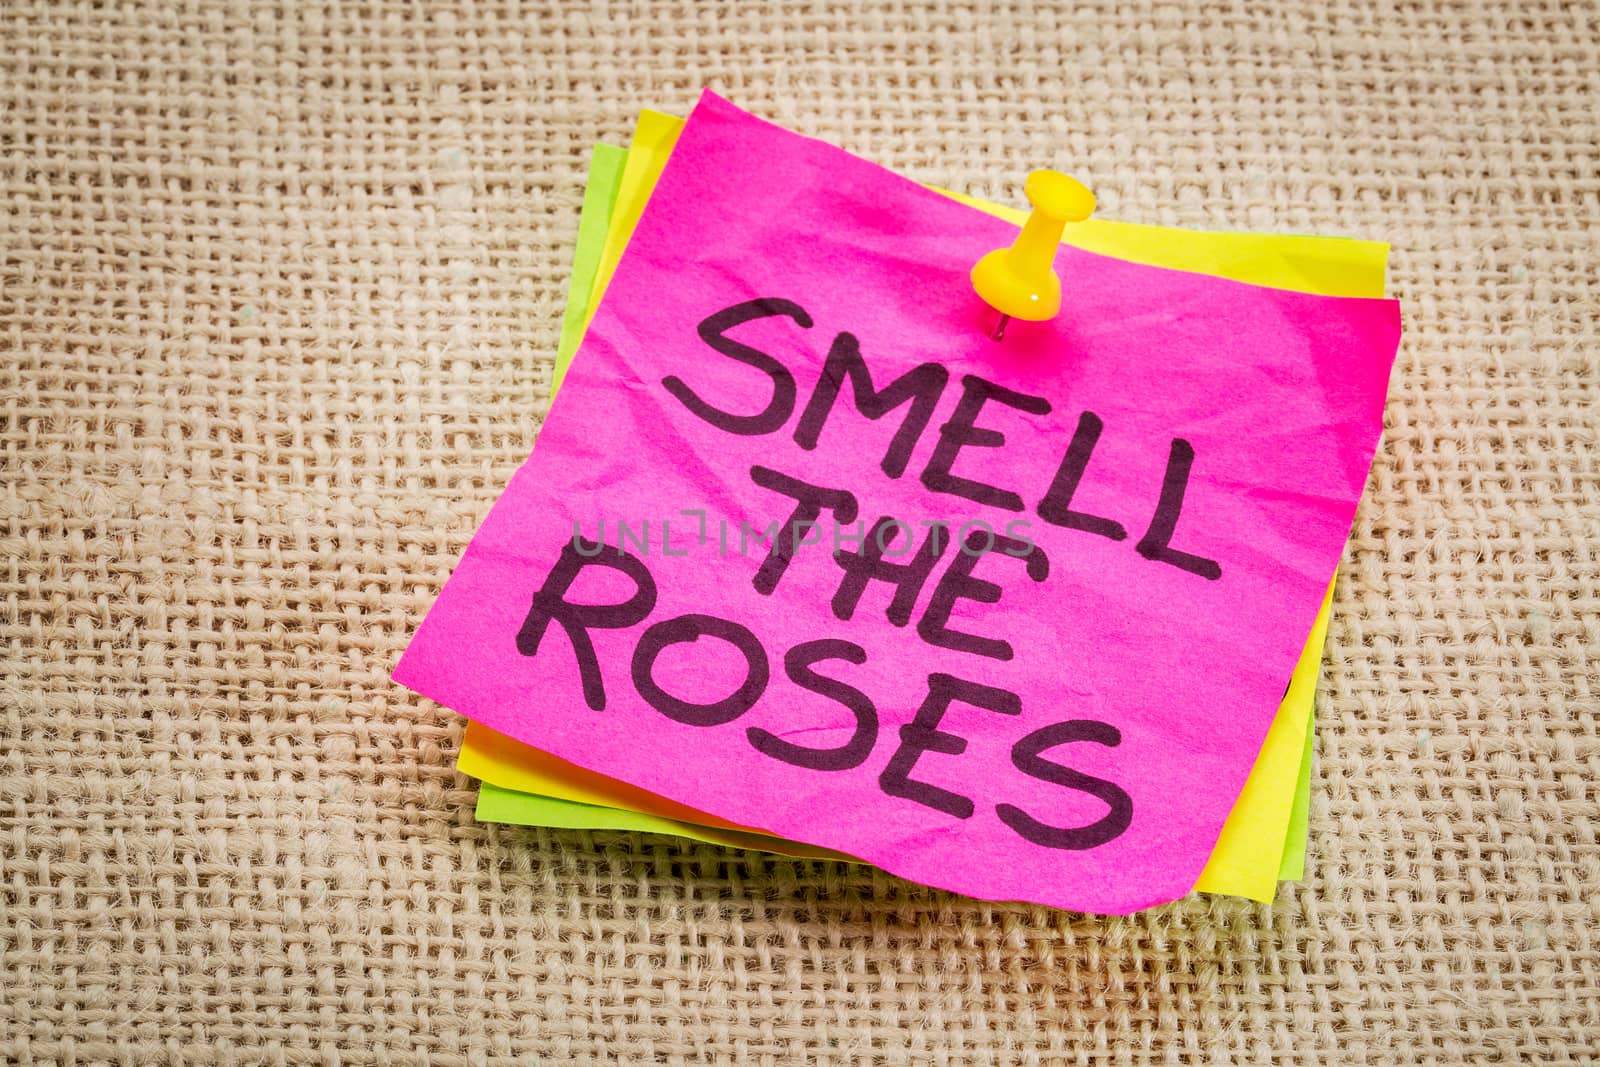 smell the roses - inspirational reminder on a sticky note against burlap canvas